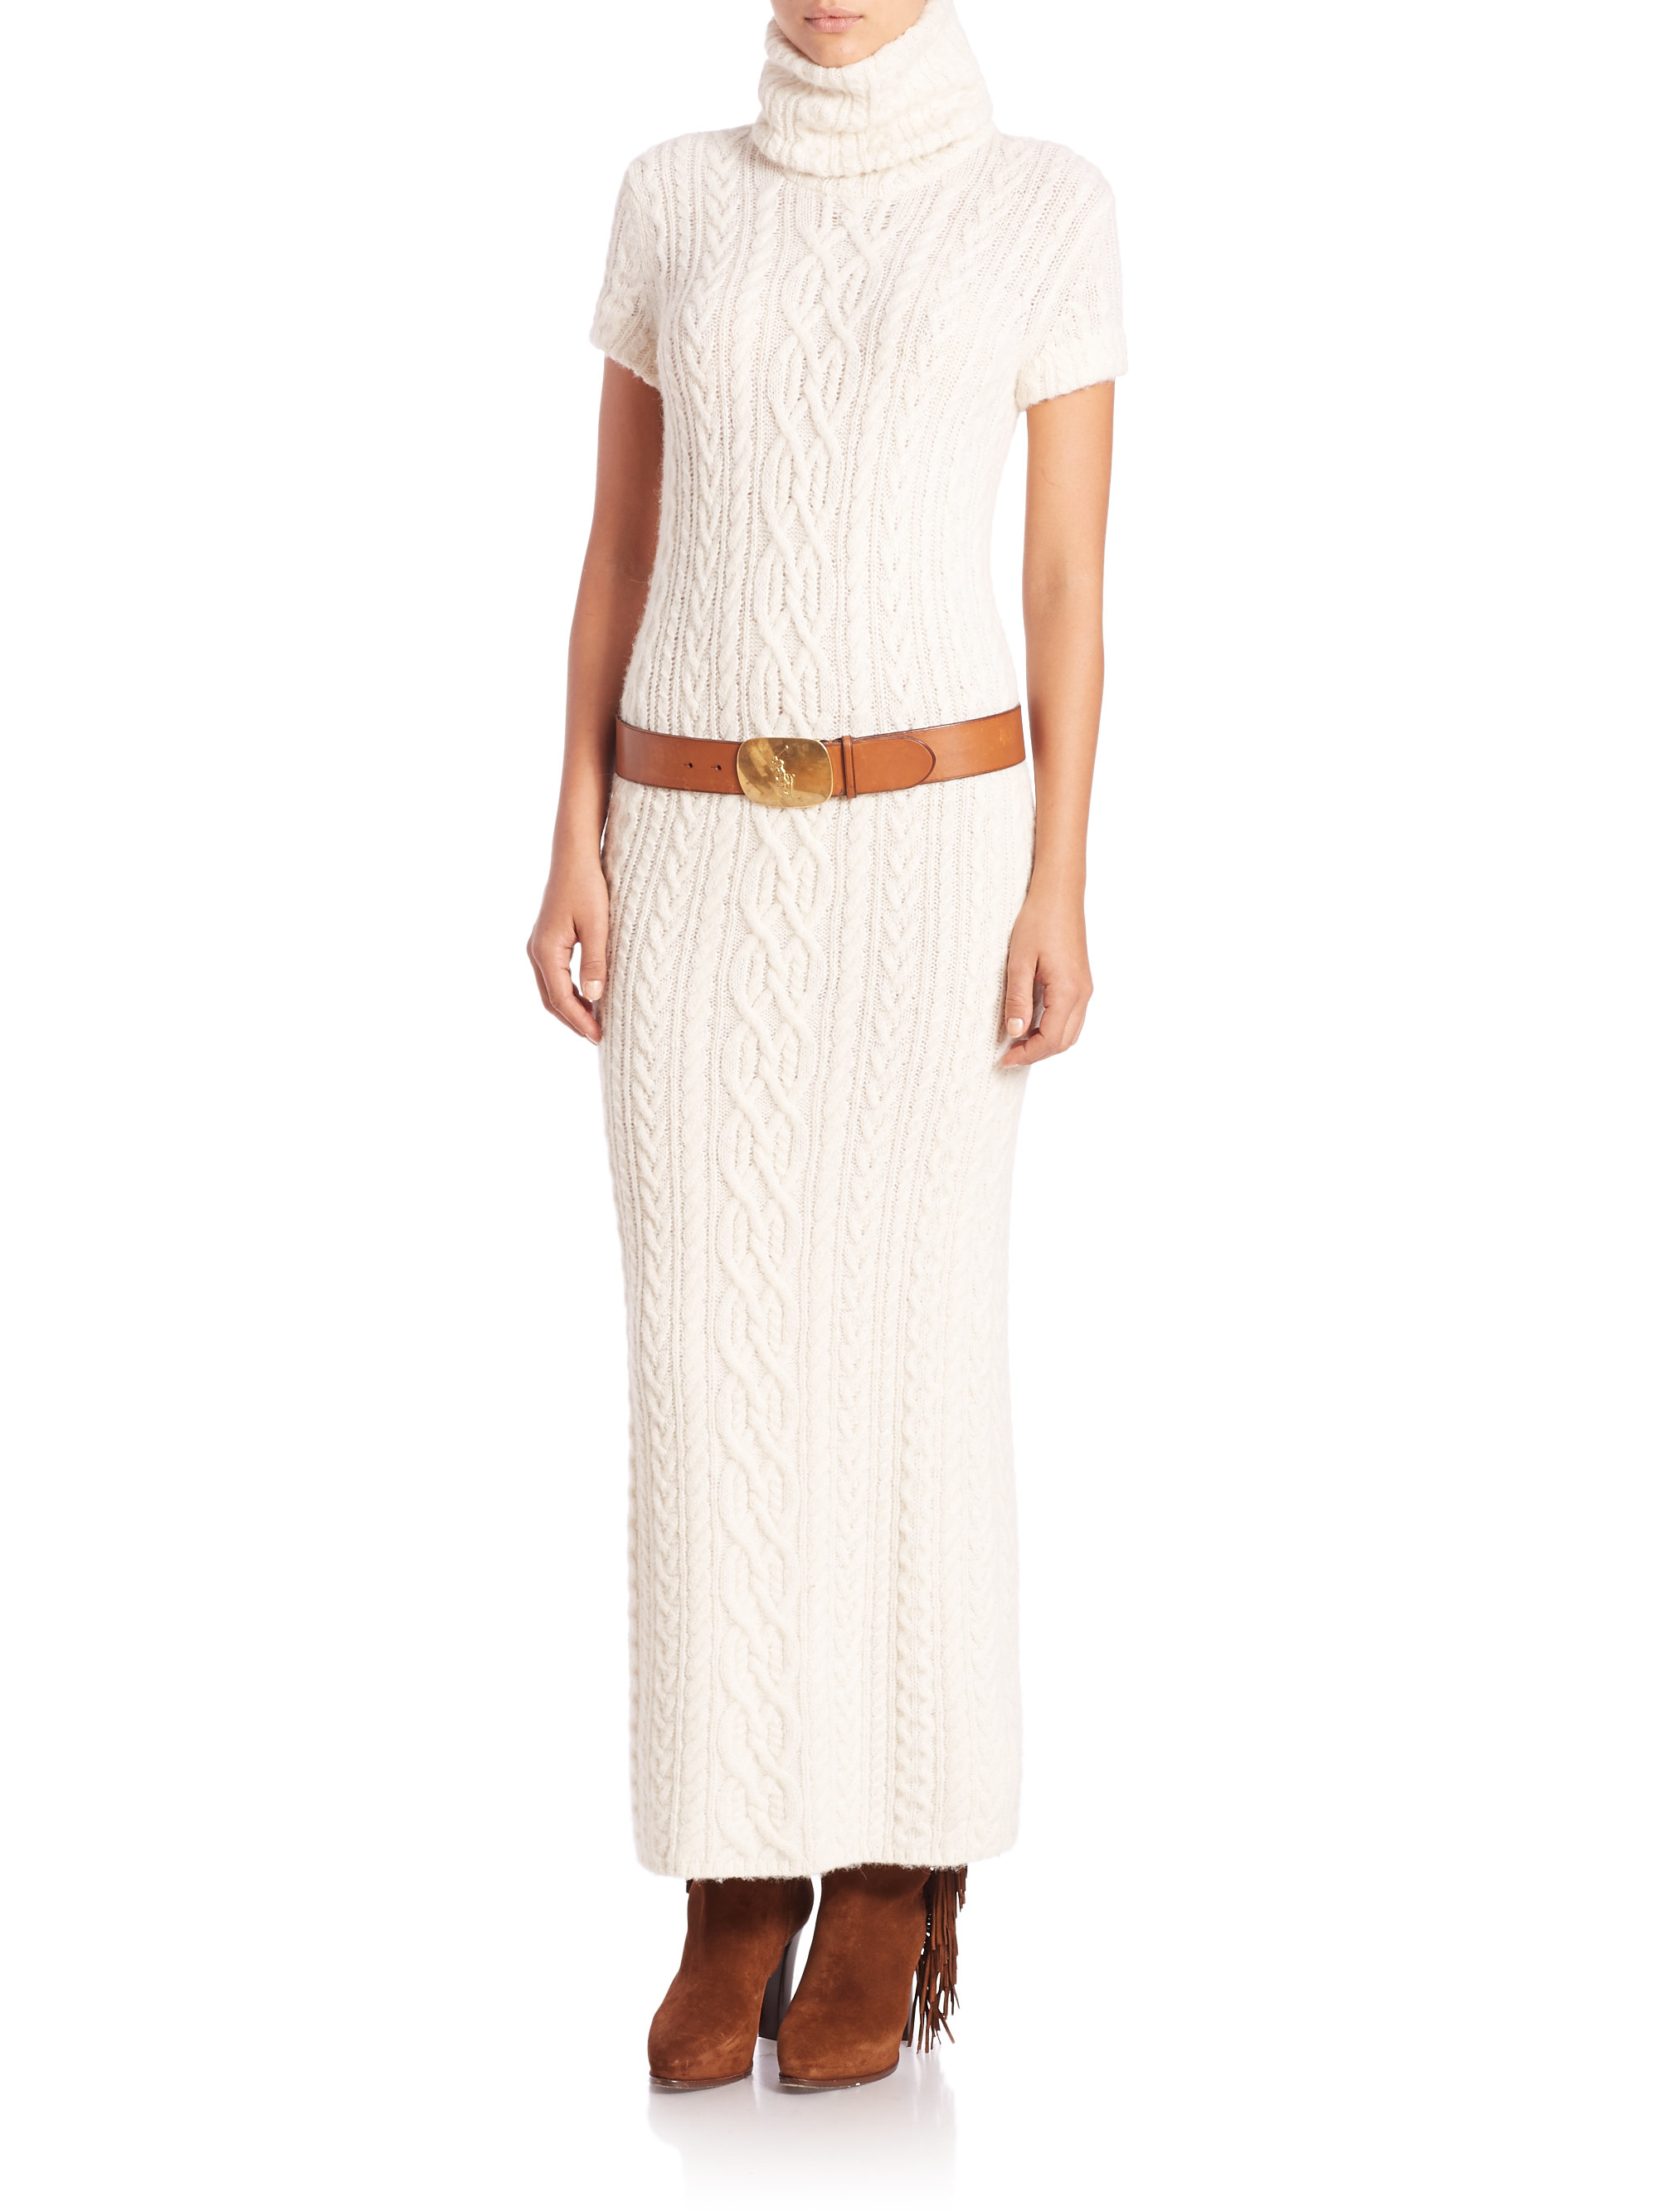 Polo Ralph Lauren Cable-knit Turtleneck Sweater Dress in Cream (Natural) -  Lyst